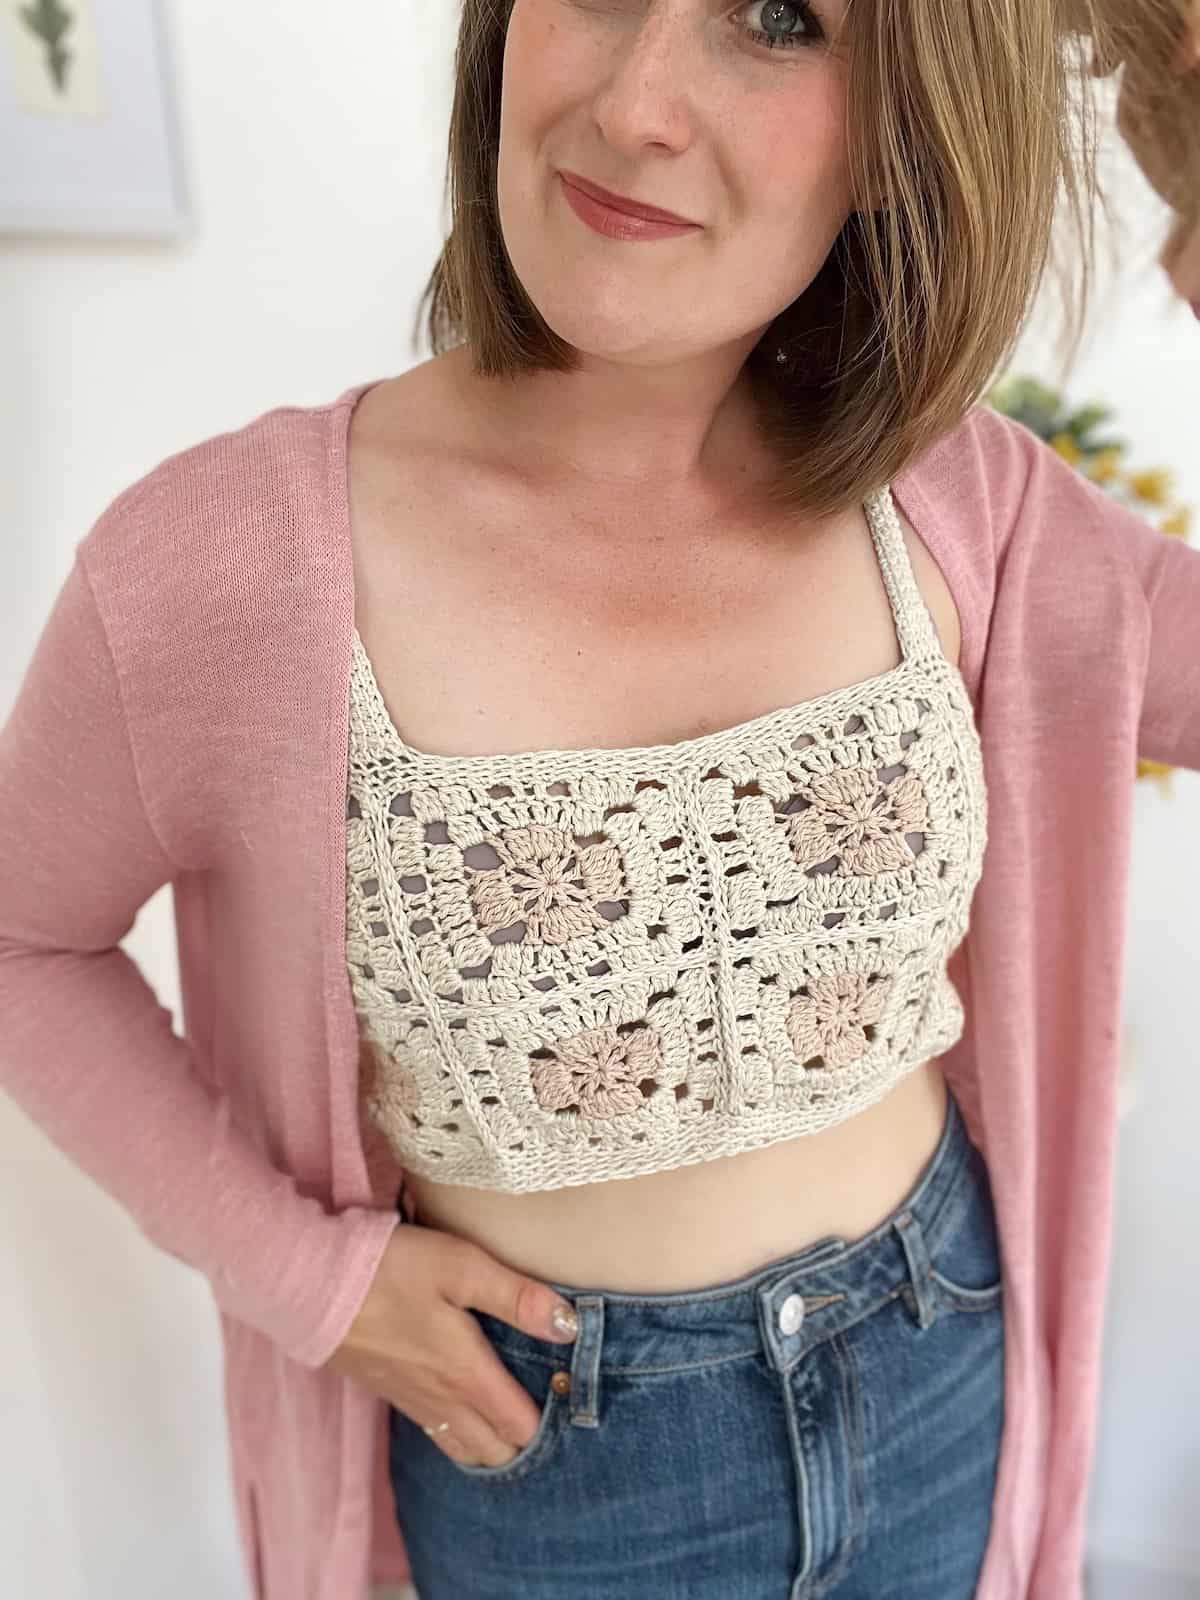 Woman wearing summer crochet crop top with straps underneath a pink long cardigan.